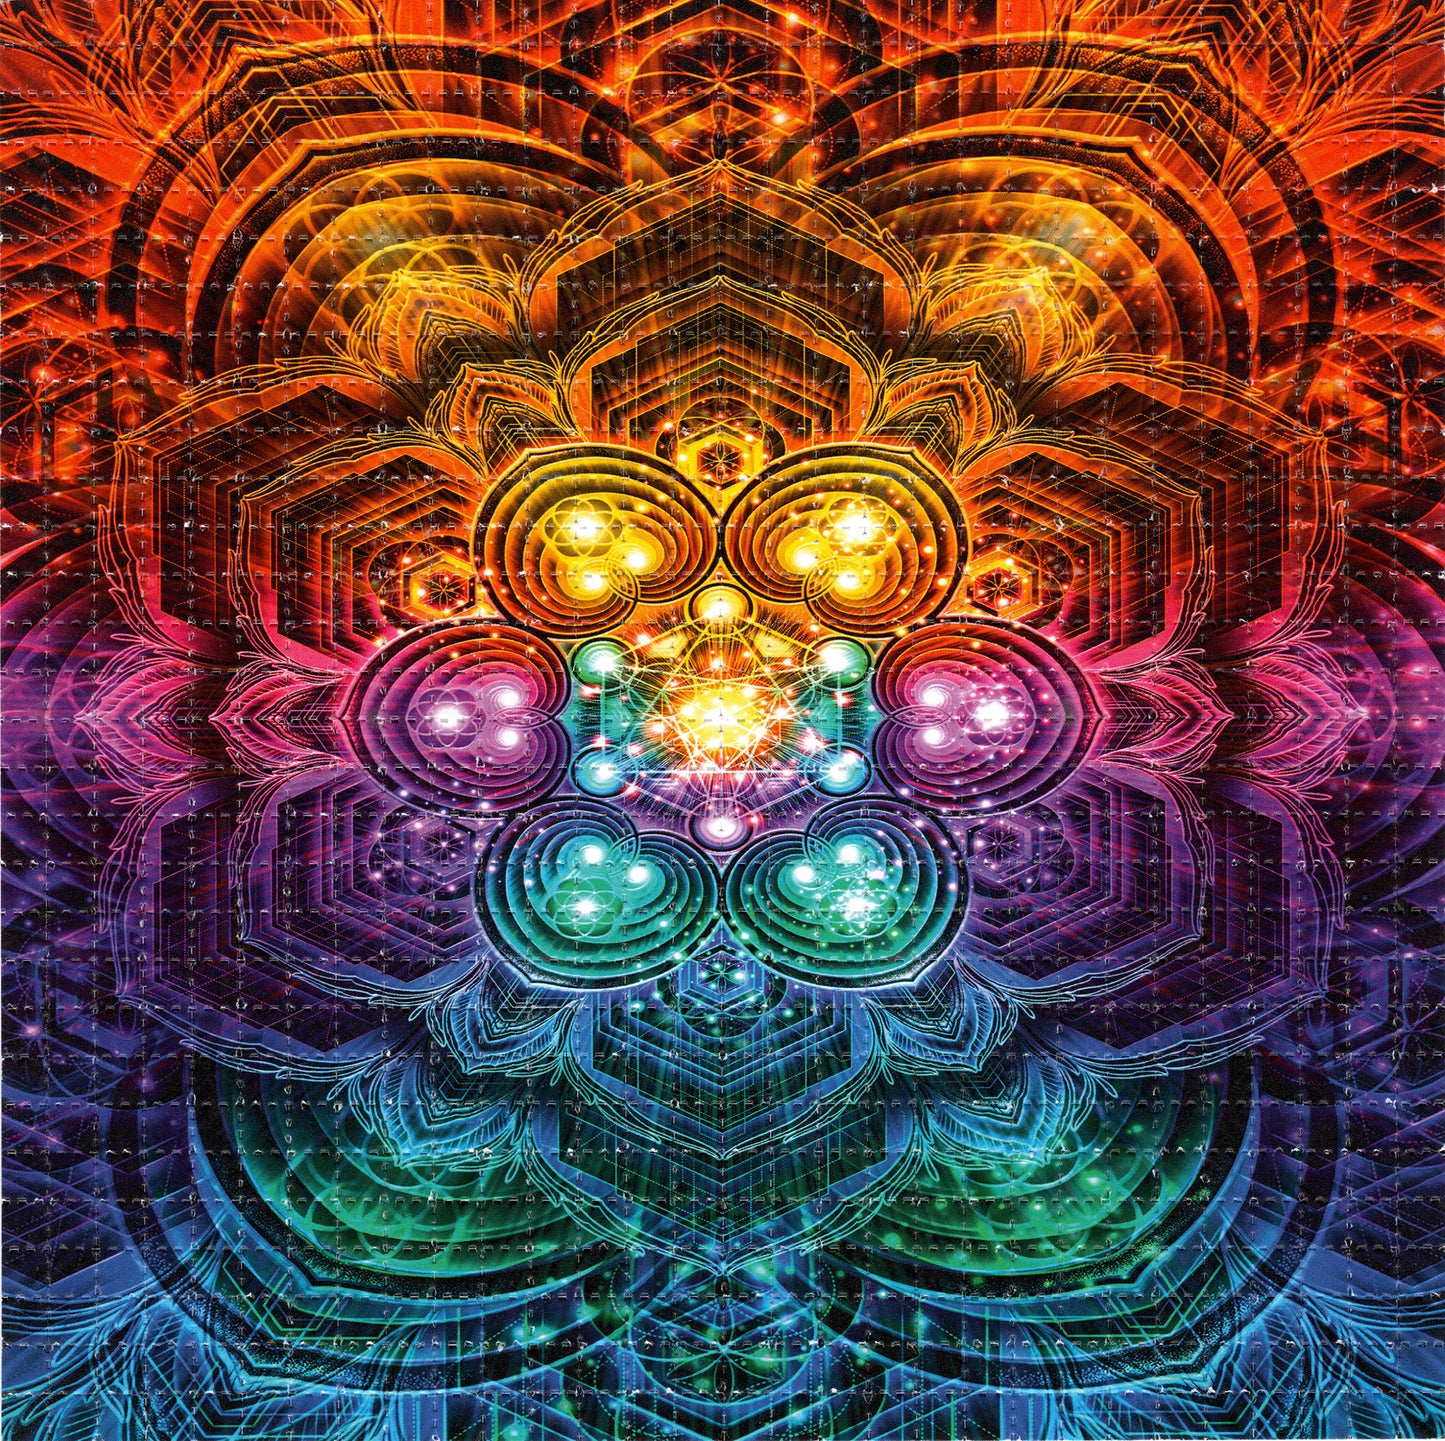 The Endless Dimension by Yantrart SIGNED Limited Edition LSD blotter art print